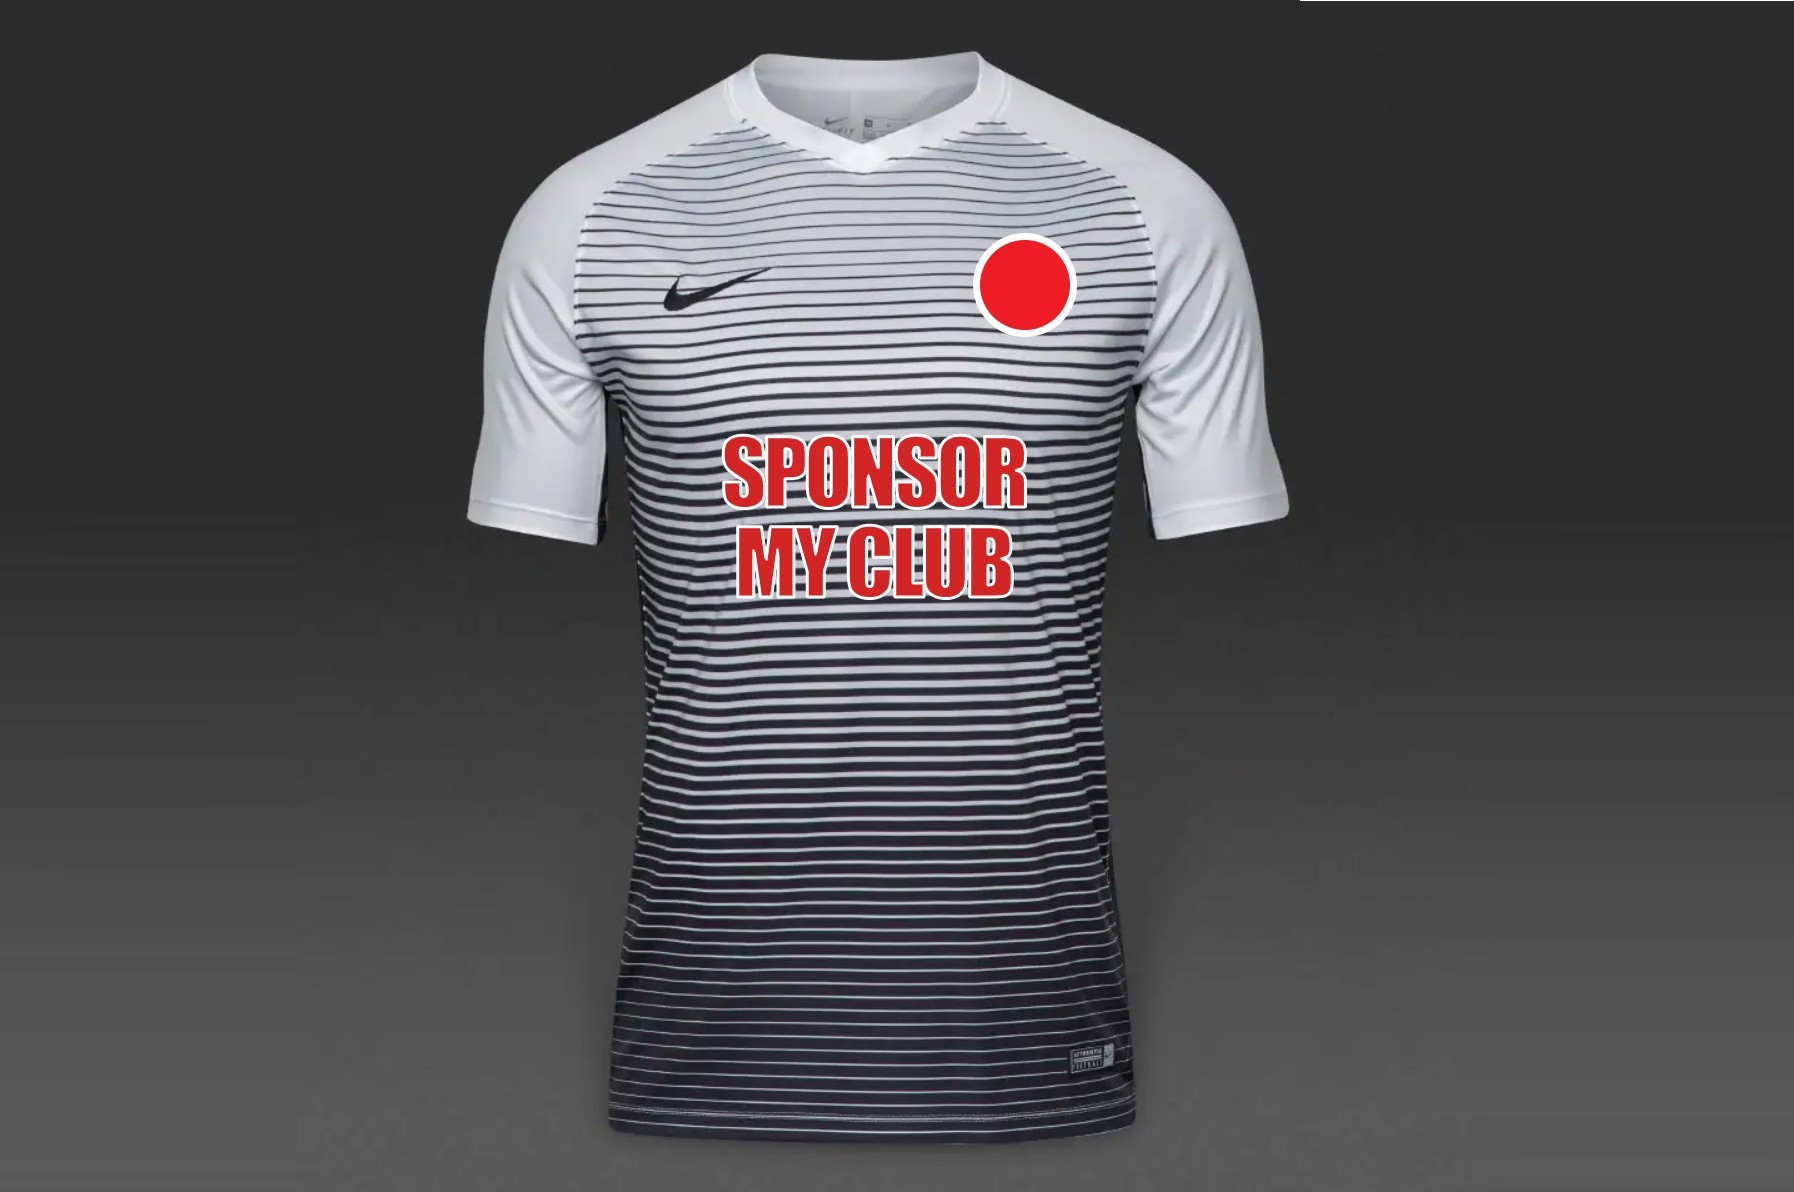 Get a helping hand with identifying potential club sponsors